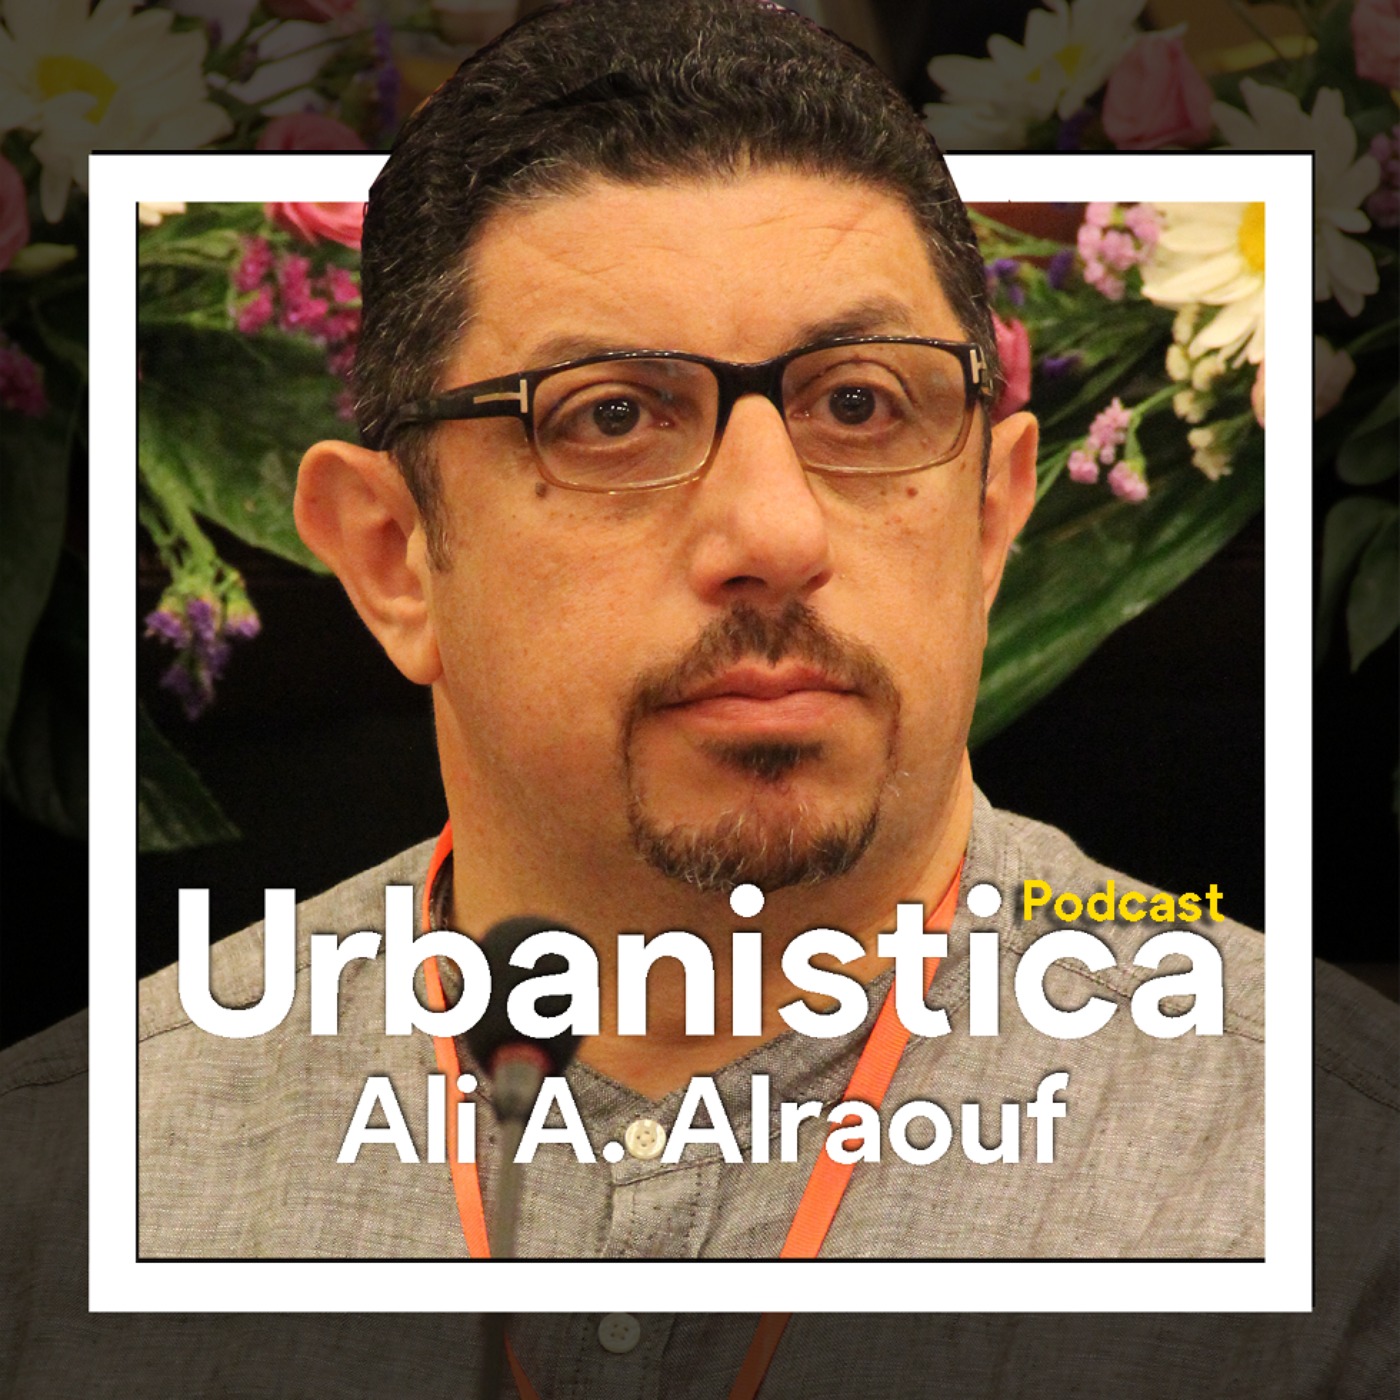 307. FIFA World Cup 2022 in Doha Qatar: A transformation of a city  - Ali A. Alraouf